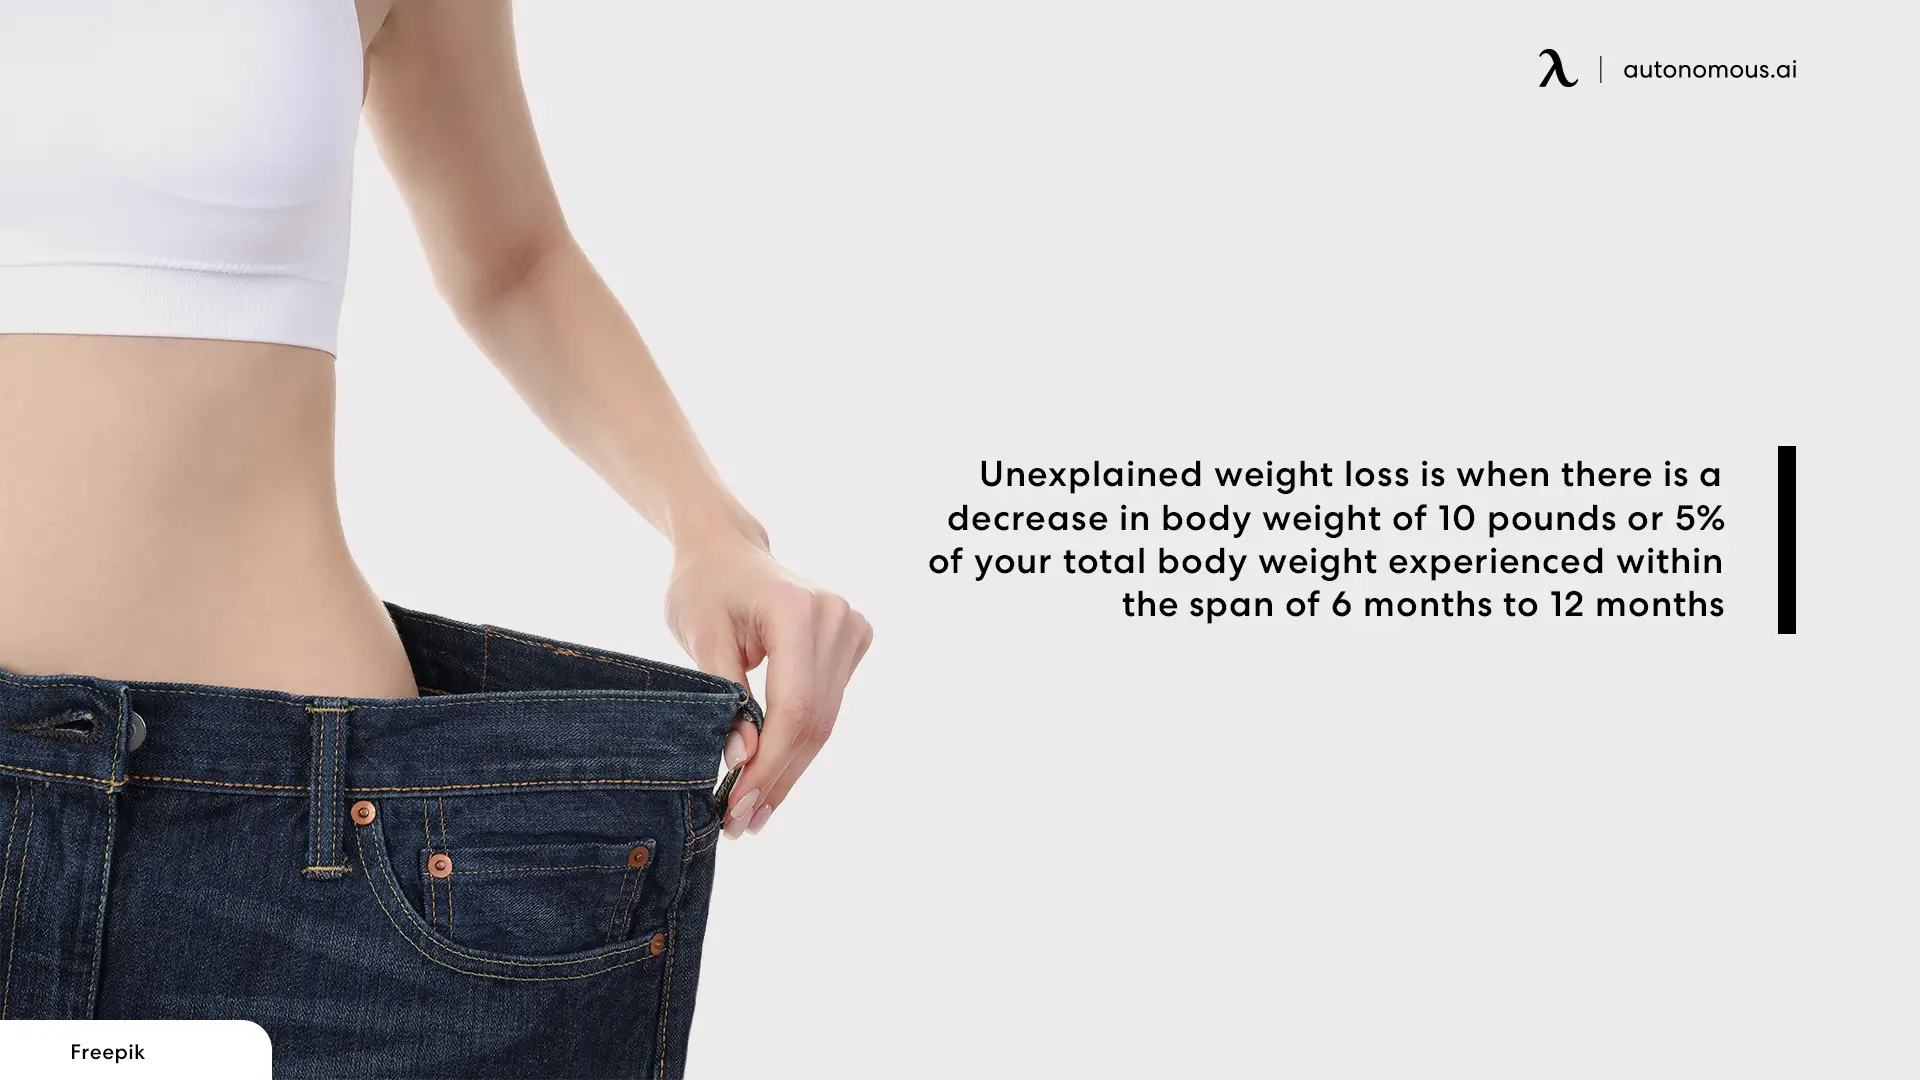 What is Unexplained Weight Loss?